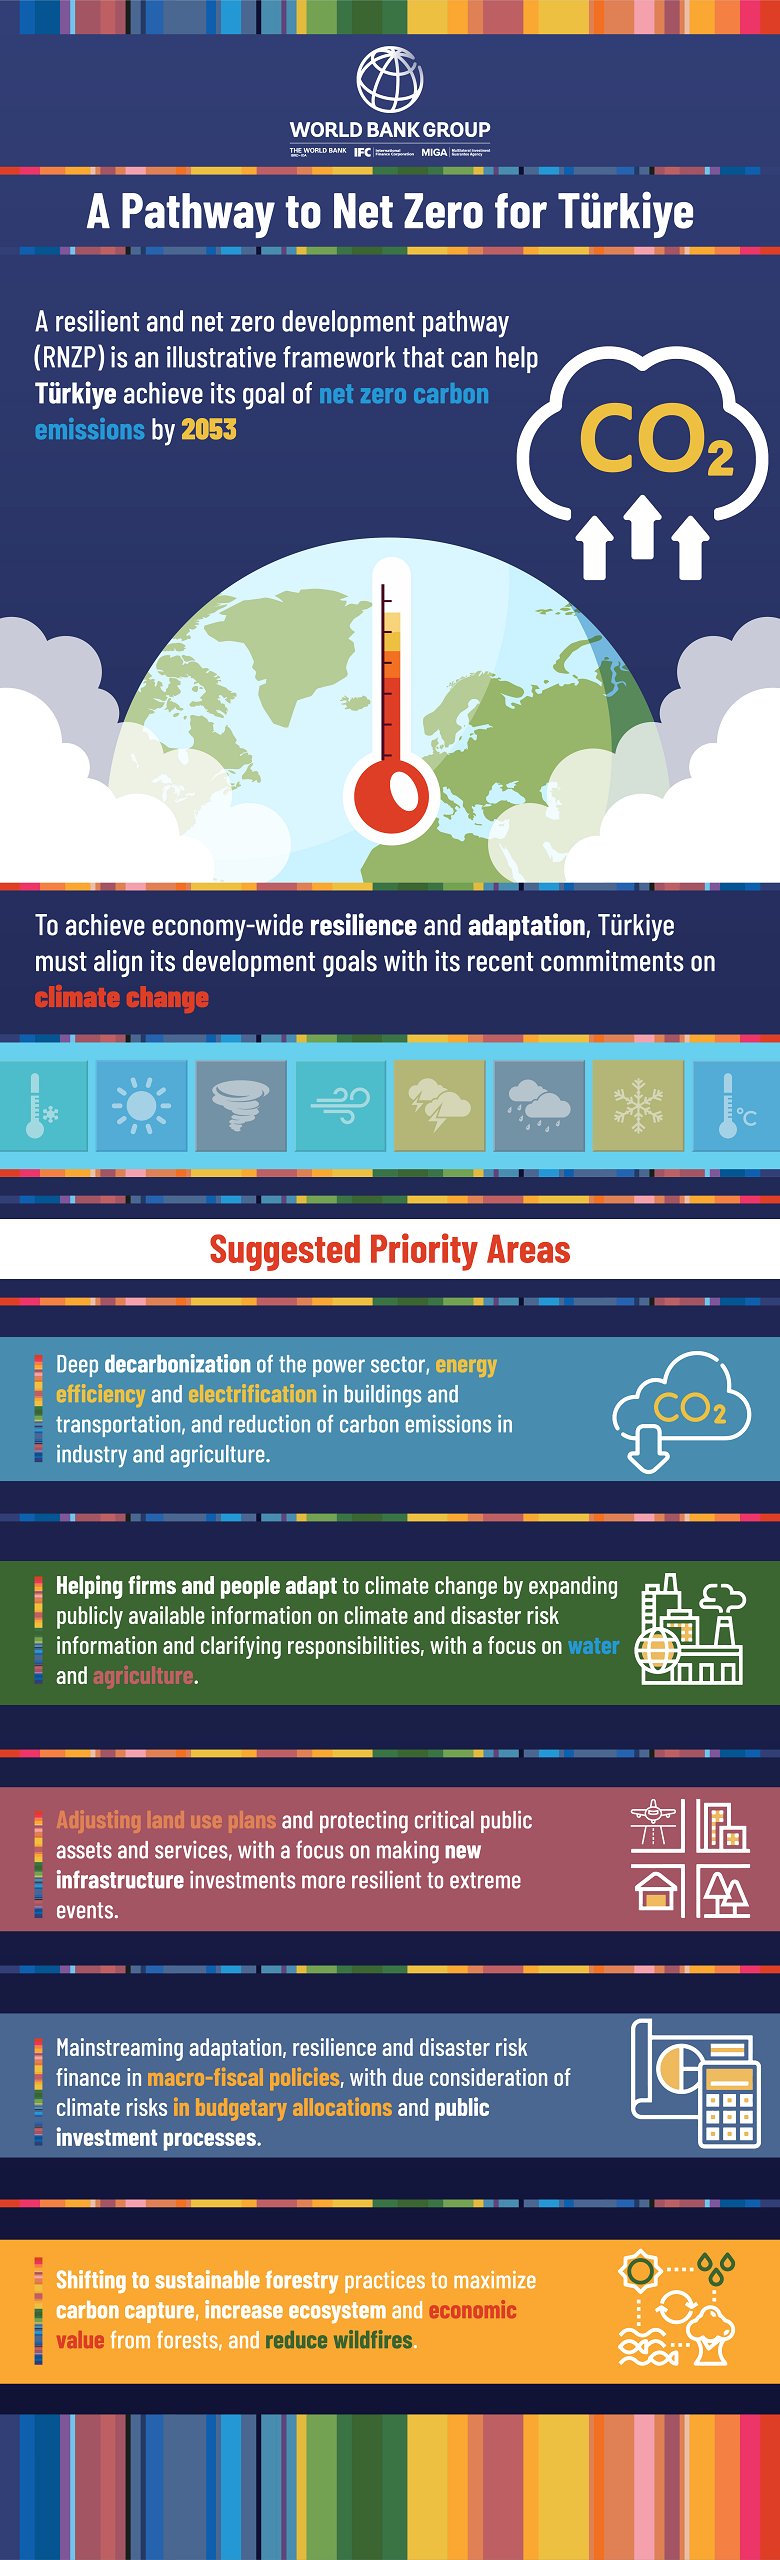 To achieve economy-wide resilience and adaptation, Türkiye must act on climate change